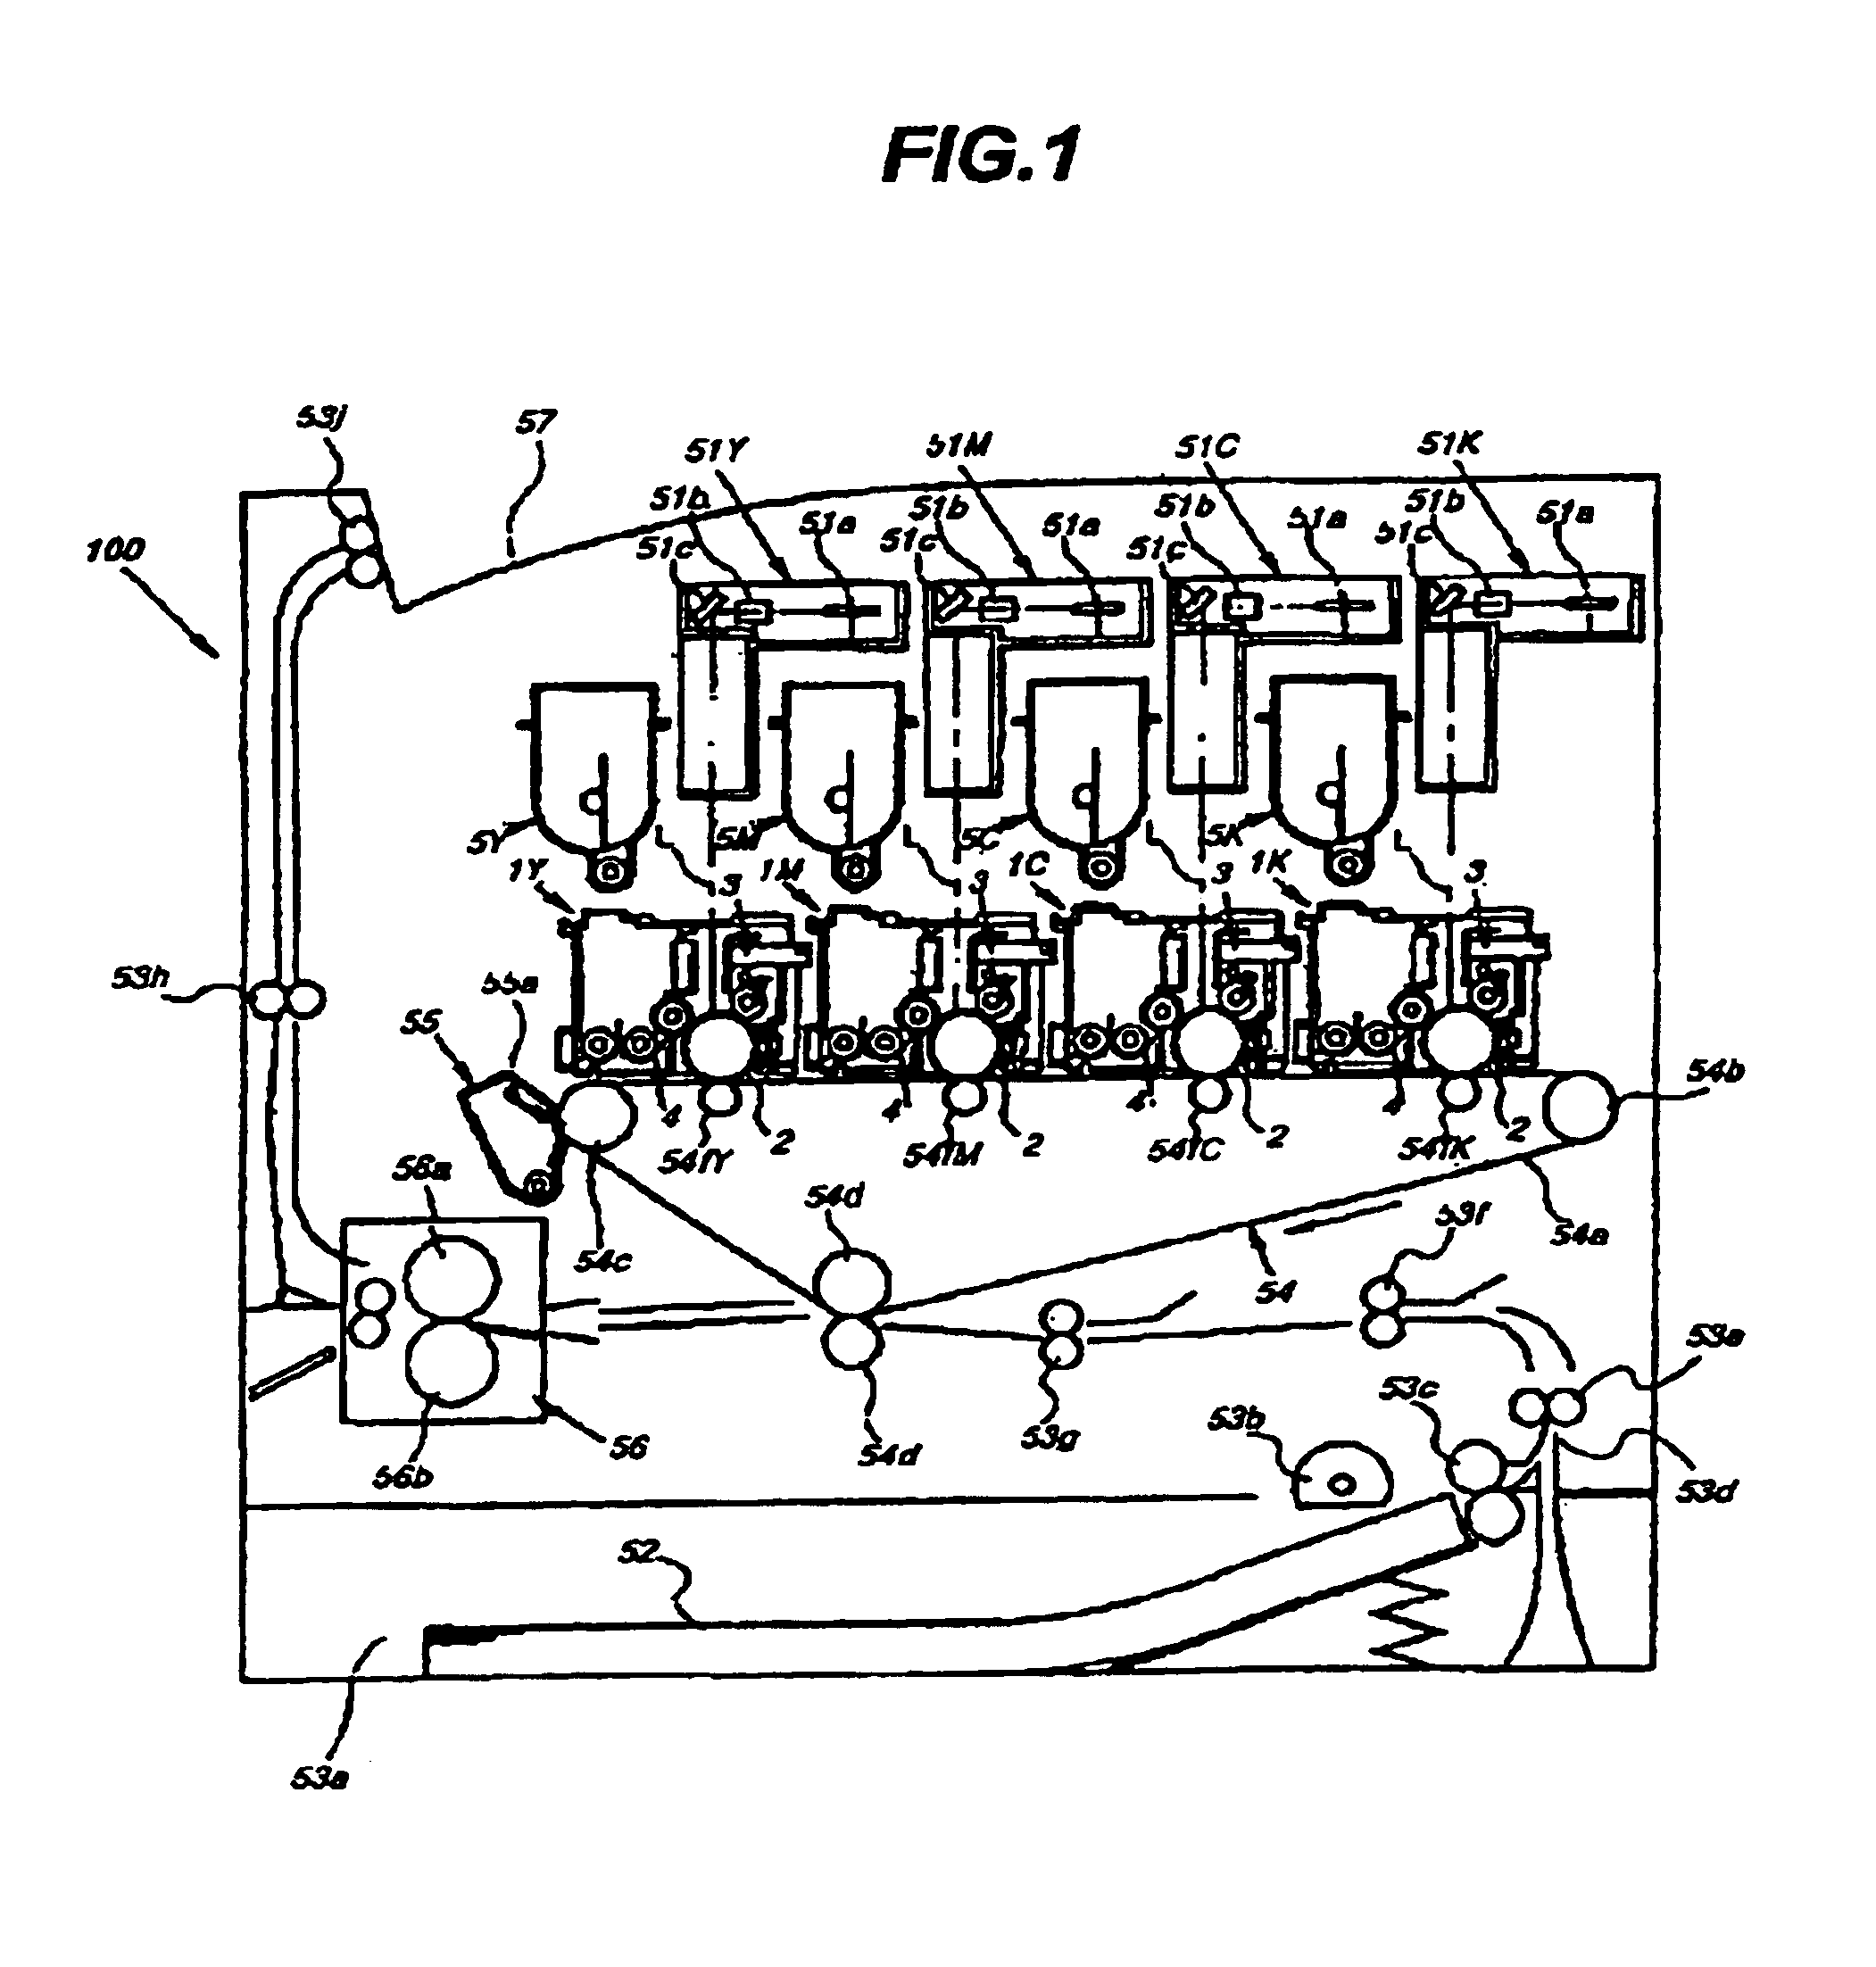 Electric contact member applying voltage to charger, process cartridge, and image forming apparatus